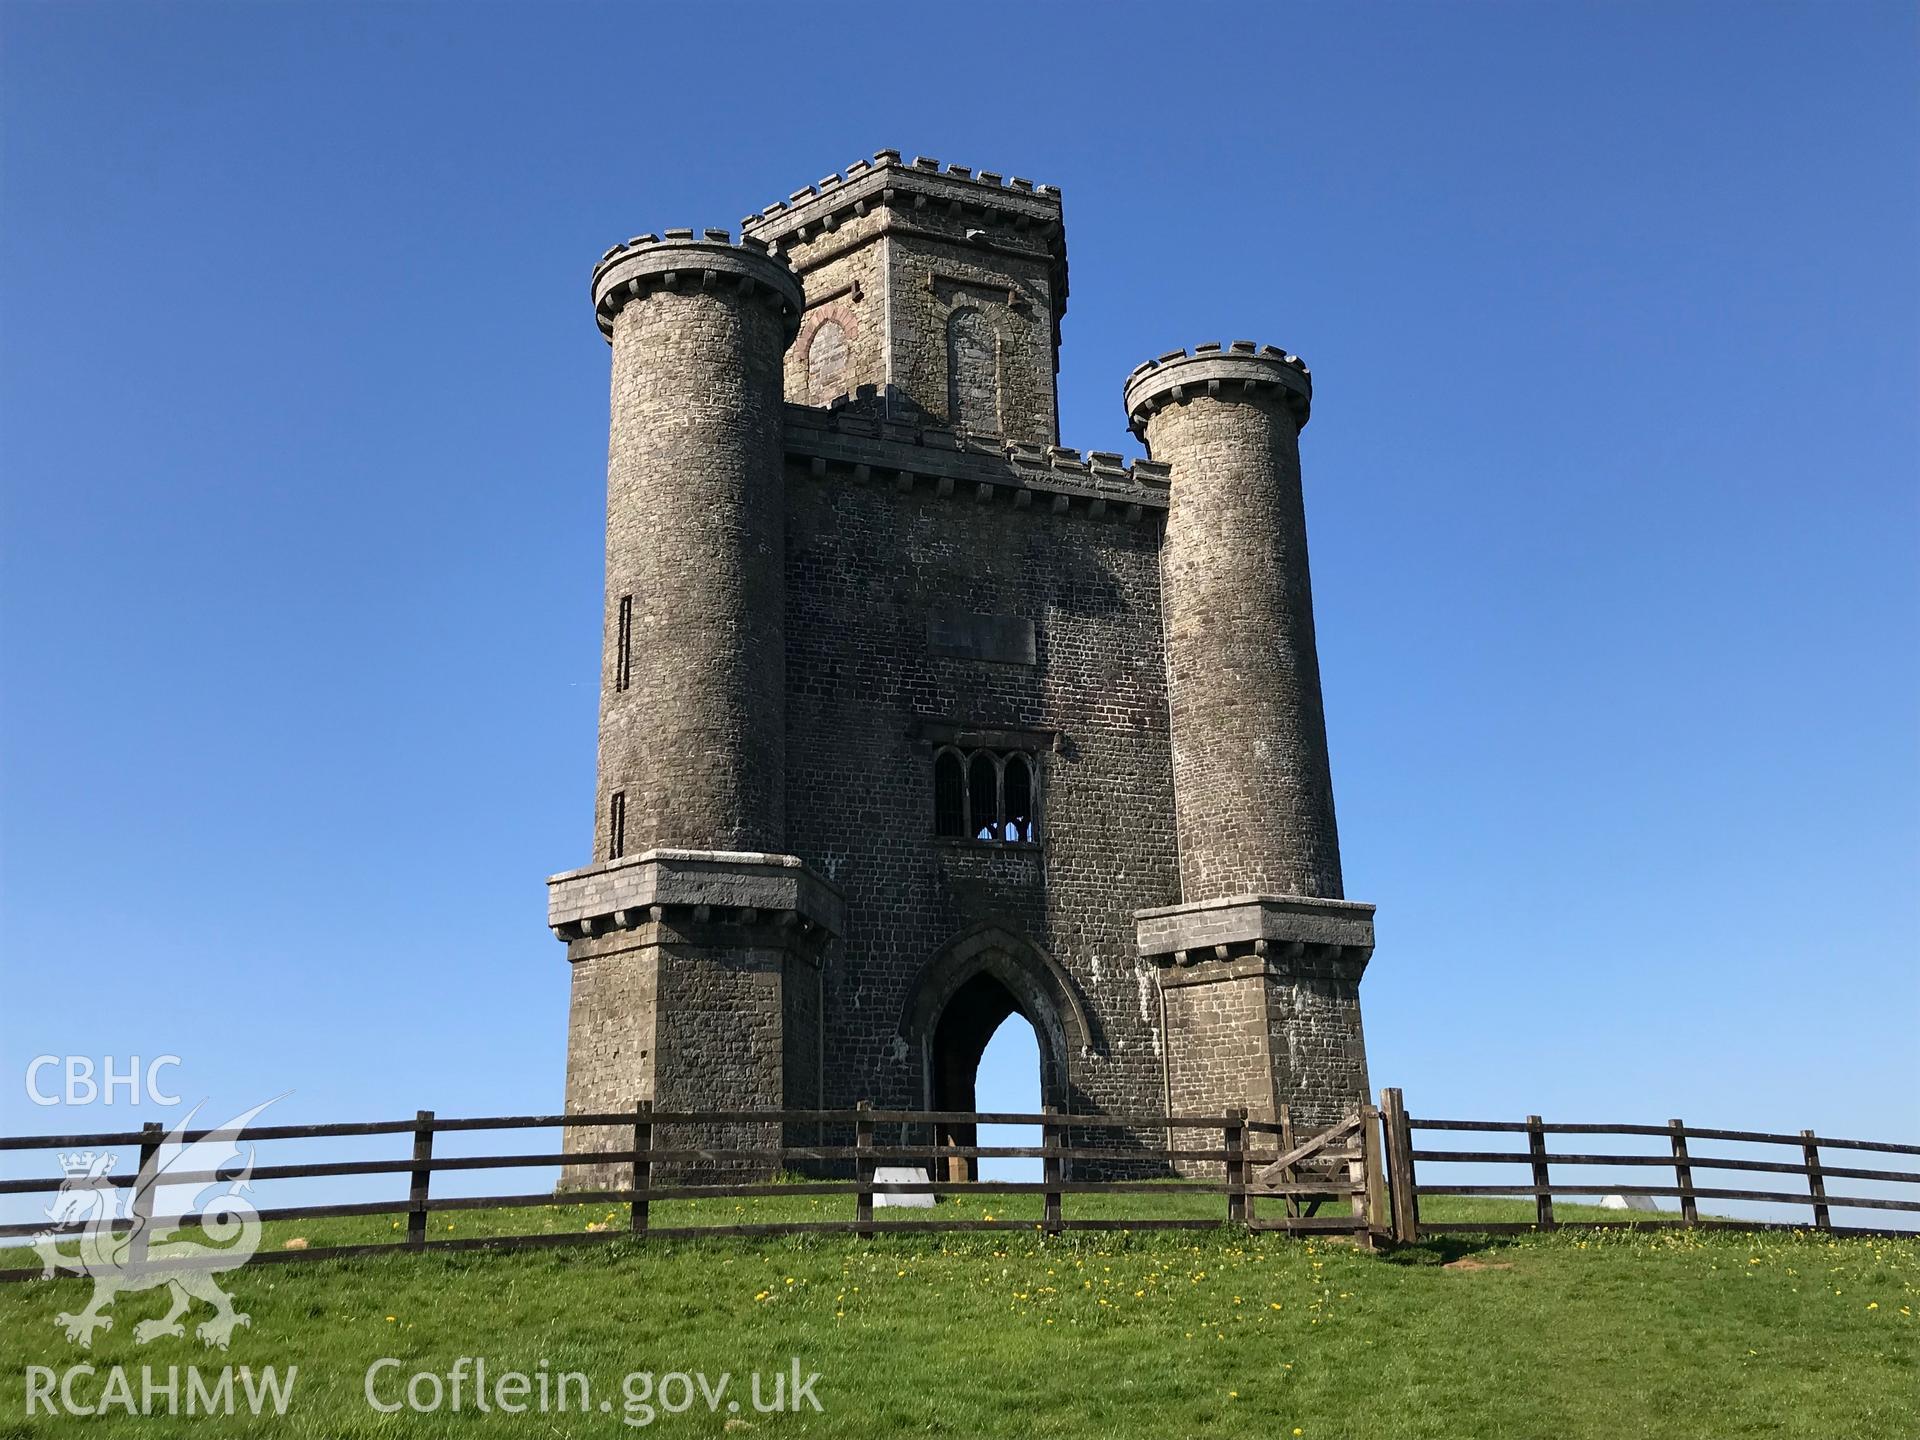 Colour photo showing view of Nelson's Tower near Middleton Hall, Llanarthney, taken by Paul R. Davis, 6th May 2018.